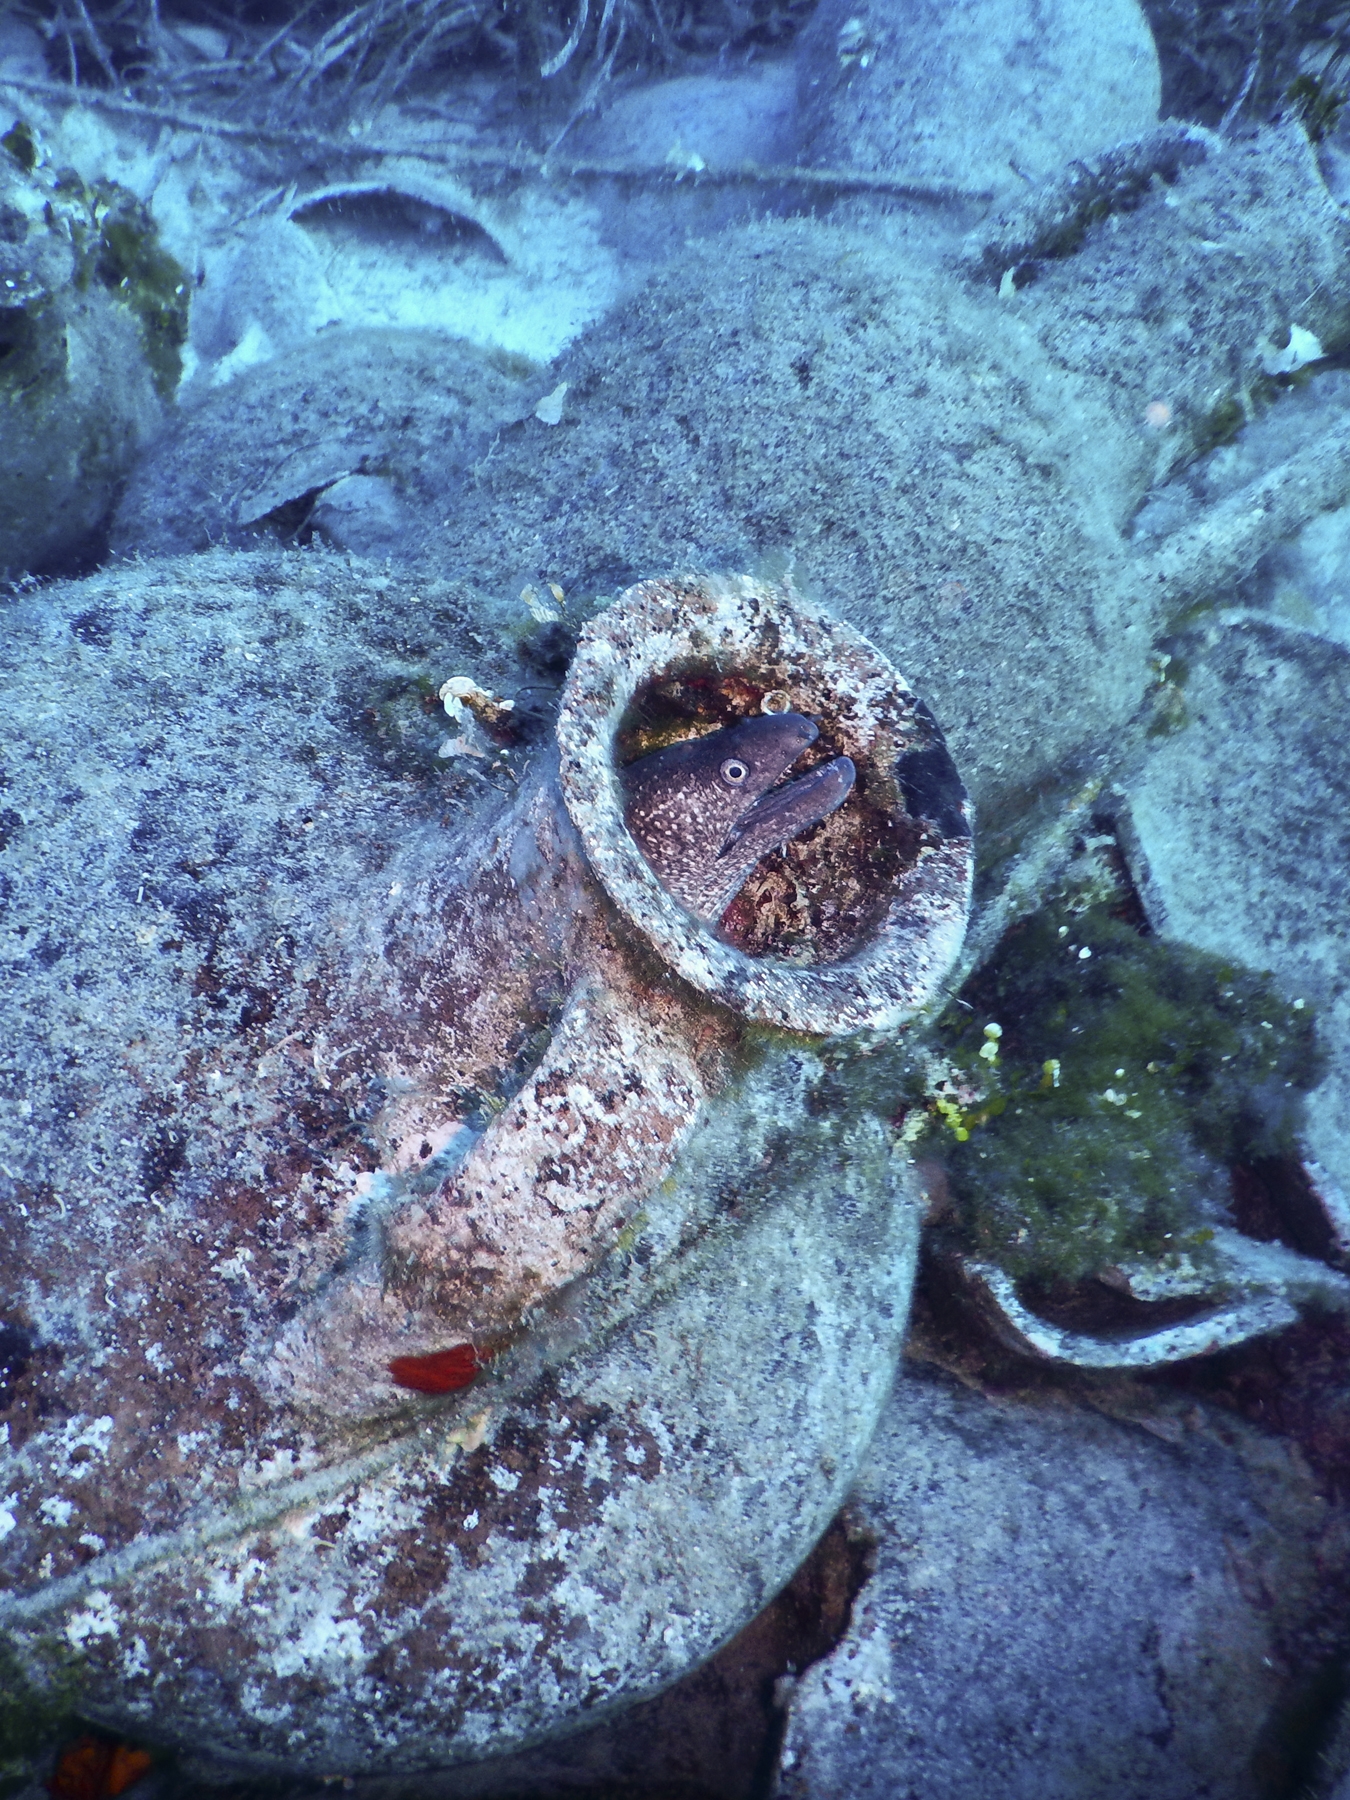 In the underwater museum you will find moray eels.